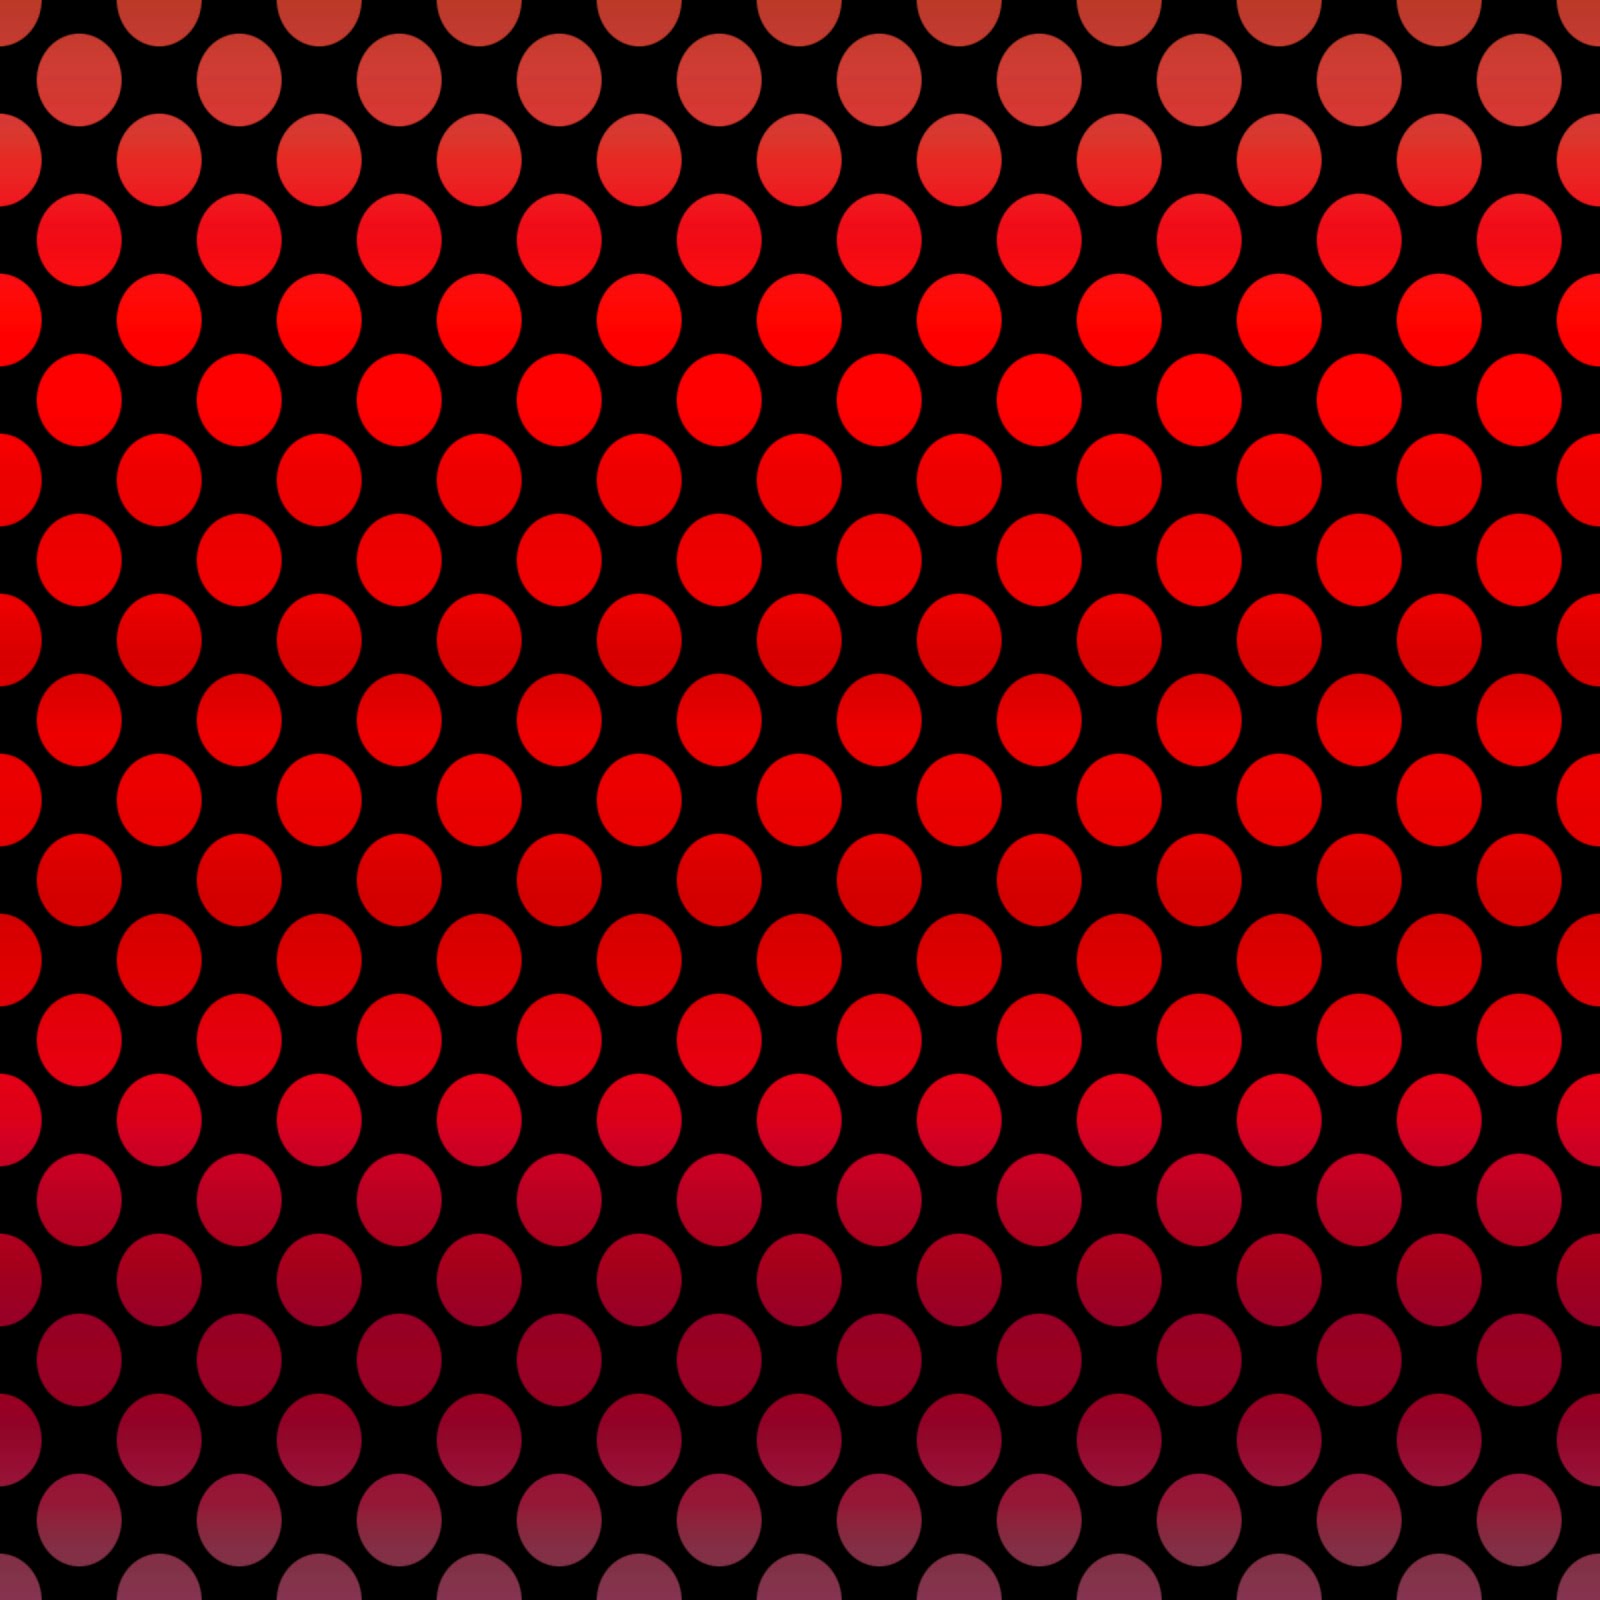 Amour Digital Scrapbook Papers Red And Black Polka Dots